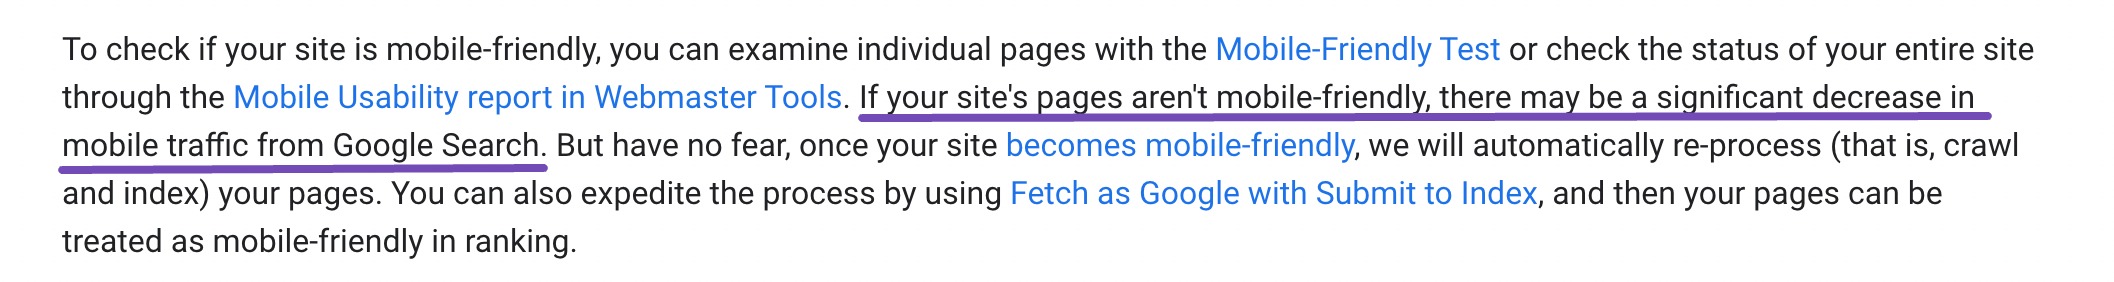 Mobile-friendly Google guidelines